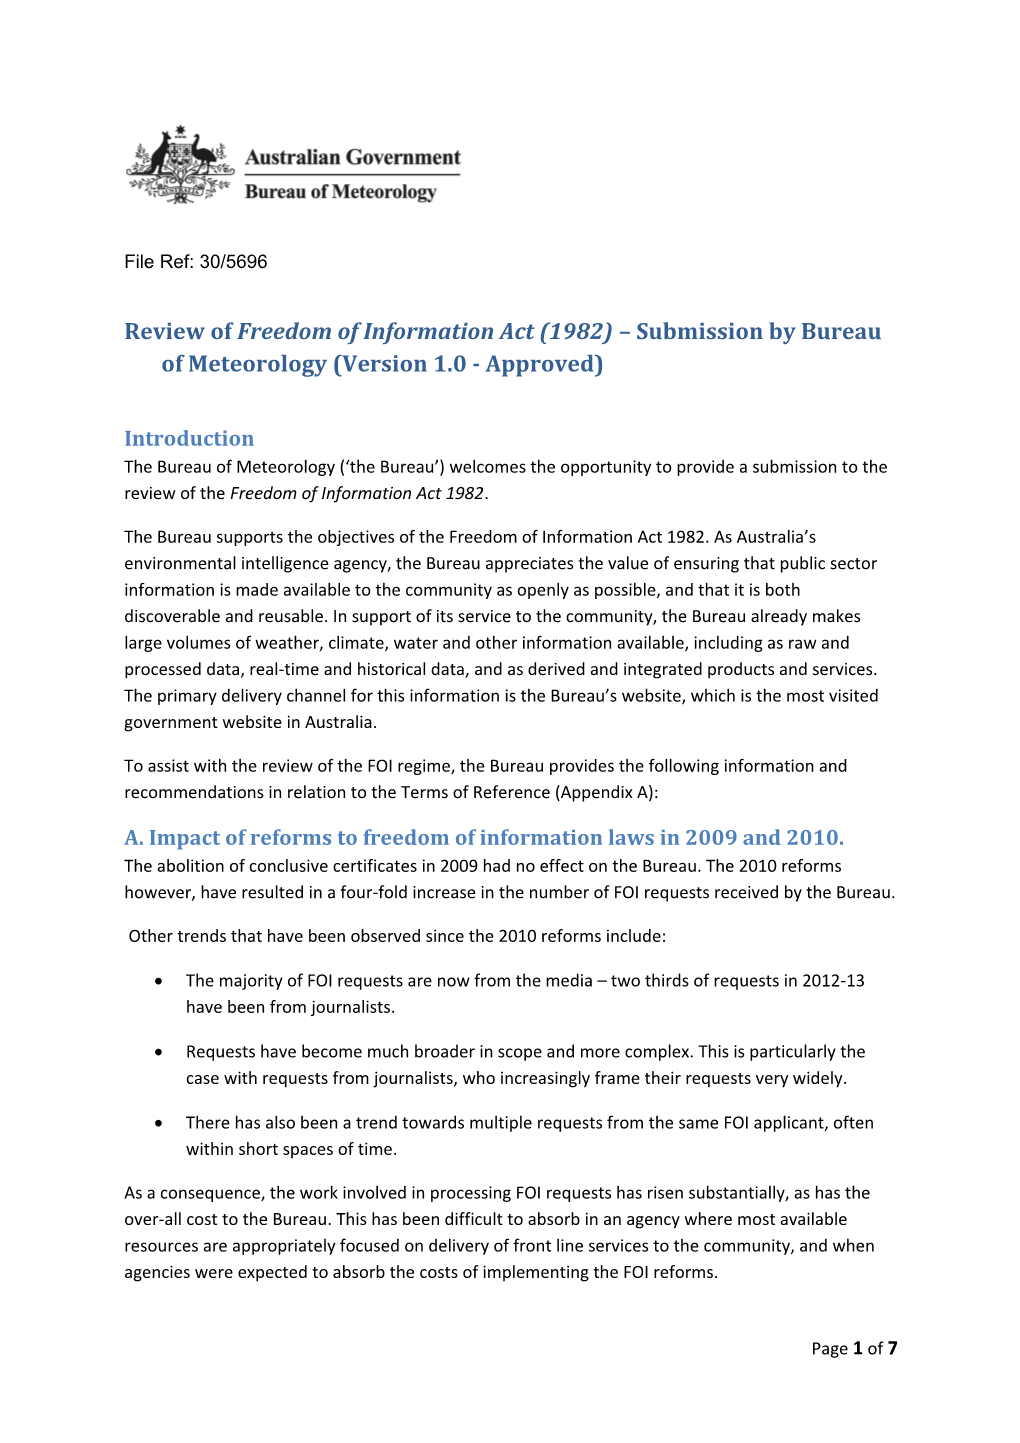 FOI Review Submission - Bureau of Meteorology